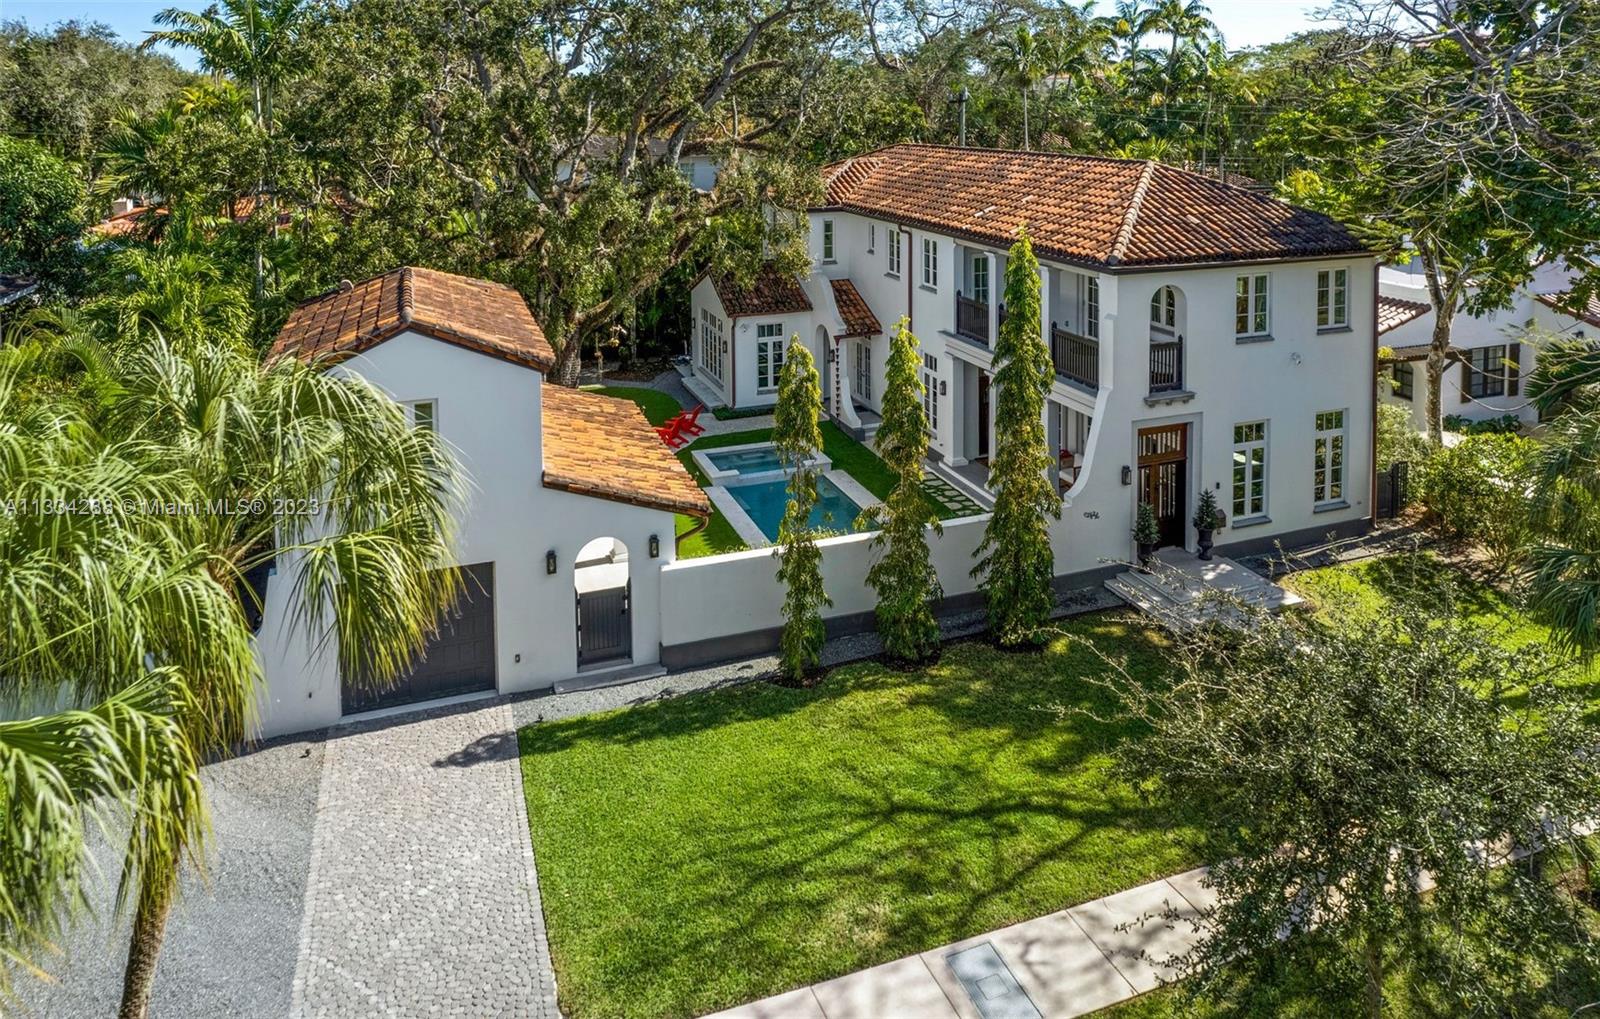 Located on prestigious North Greenway Drive in Coral Gables, the 5-bedroom, 5/1-bathroom main residence and charming guest house was the 2019 recipient of the notable Addison Mizner ICAA architectural award. The award-winning 4,813 SF home is situated on a sizable 11,000 SF lot. An impressive gourmet kitchen offers top-of-the-line appliances with a Wolf gas range and double oven, Sub-Zero refrigerator, freezer, and wine fridge. The expansive primary bedroom suite includes a separate seating area, kitchenette, and an oversized walk-in closet. The outdoor entertainment area features a beautiful heated saltwater pool with spa and a fully-equipped summer kitchen with built-in barbecue. Additional features include a whole house generator and covered terraces overlooking the backyard.